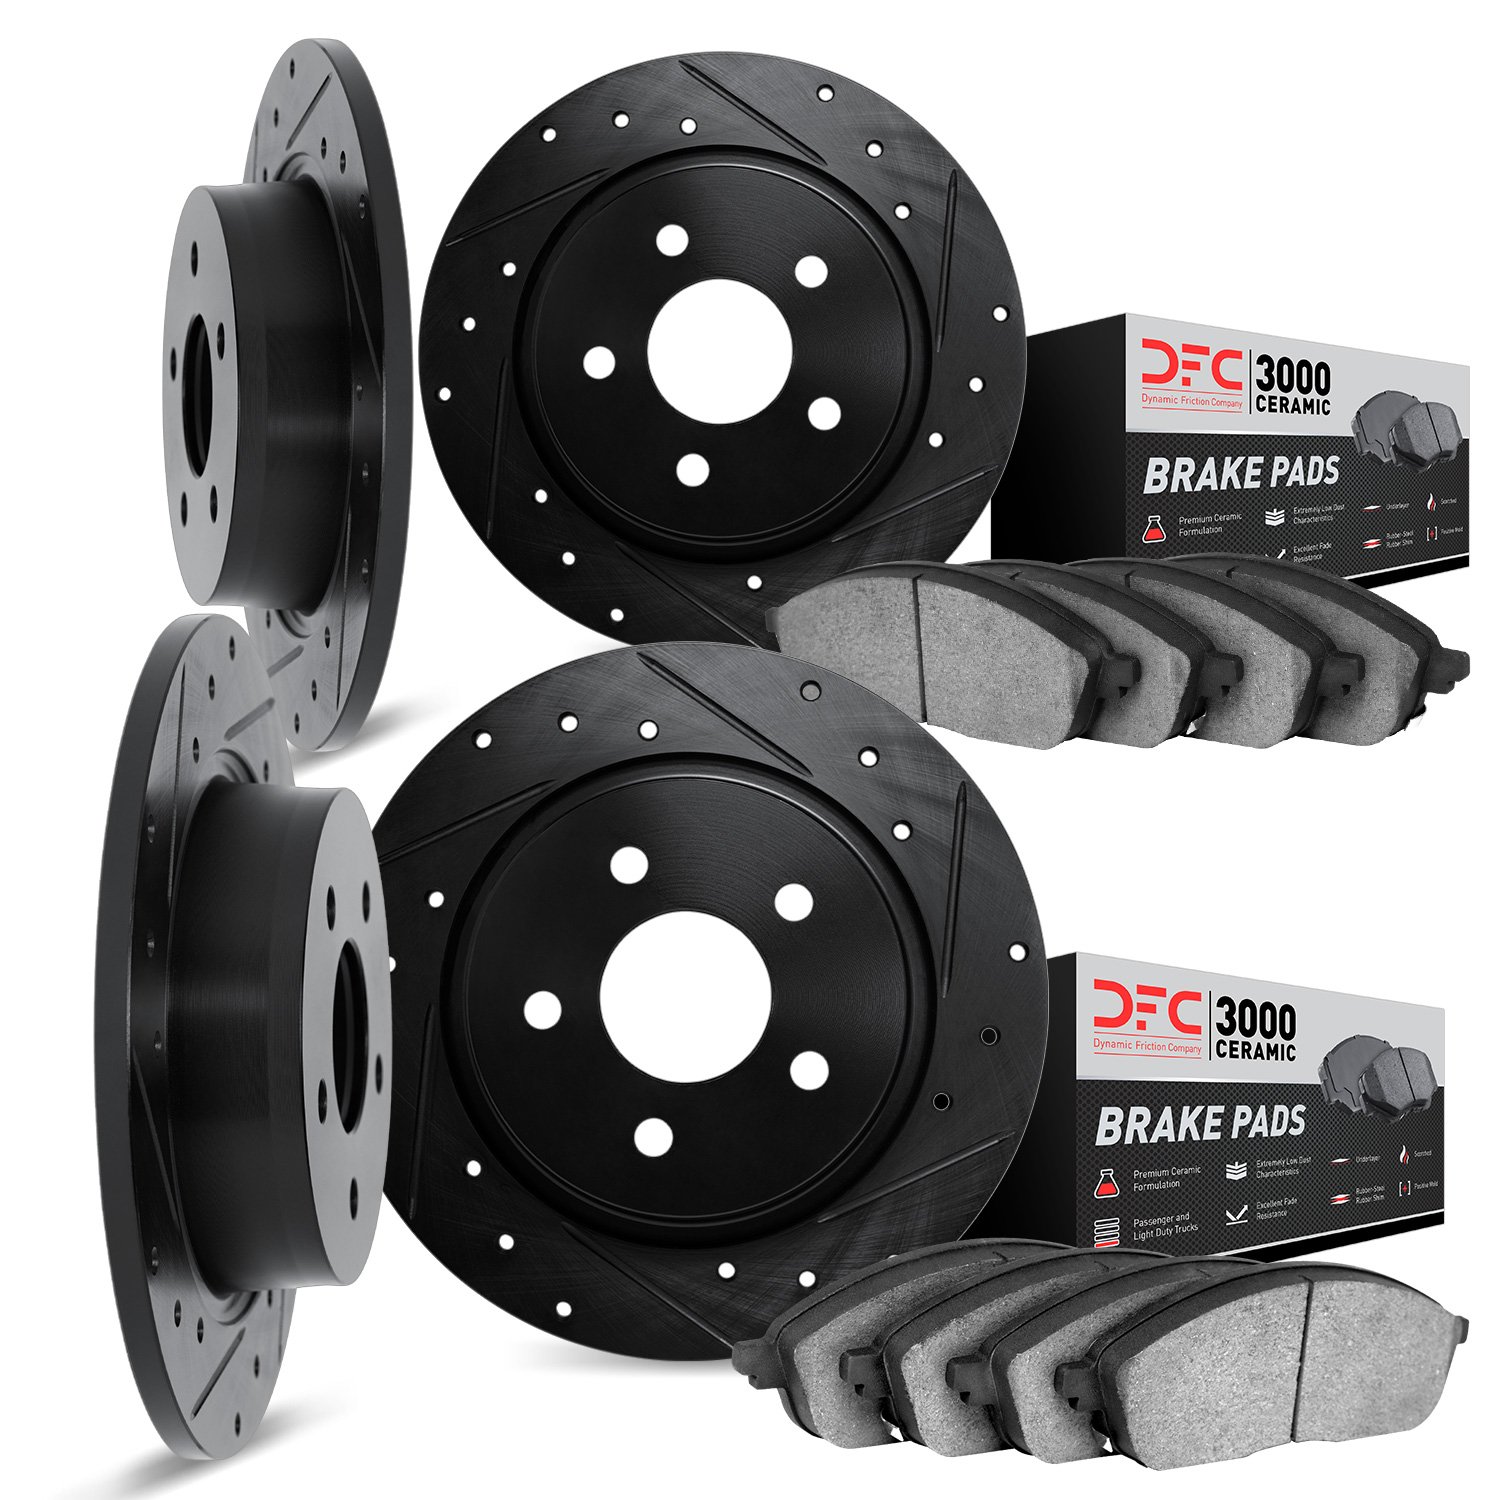 8304-63068 Drilled/Slotted Brake Rotors with 3000-Series Ceramic Brake Pads Kit [Black], 1997-1998 Mercedes-Benz, Position: Fron